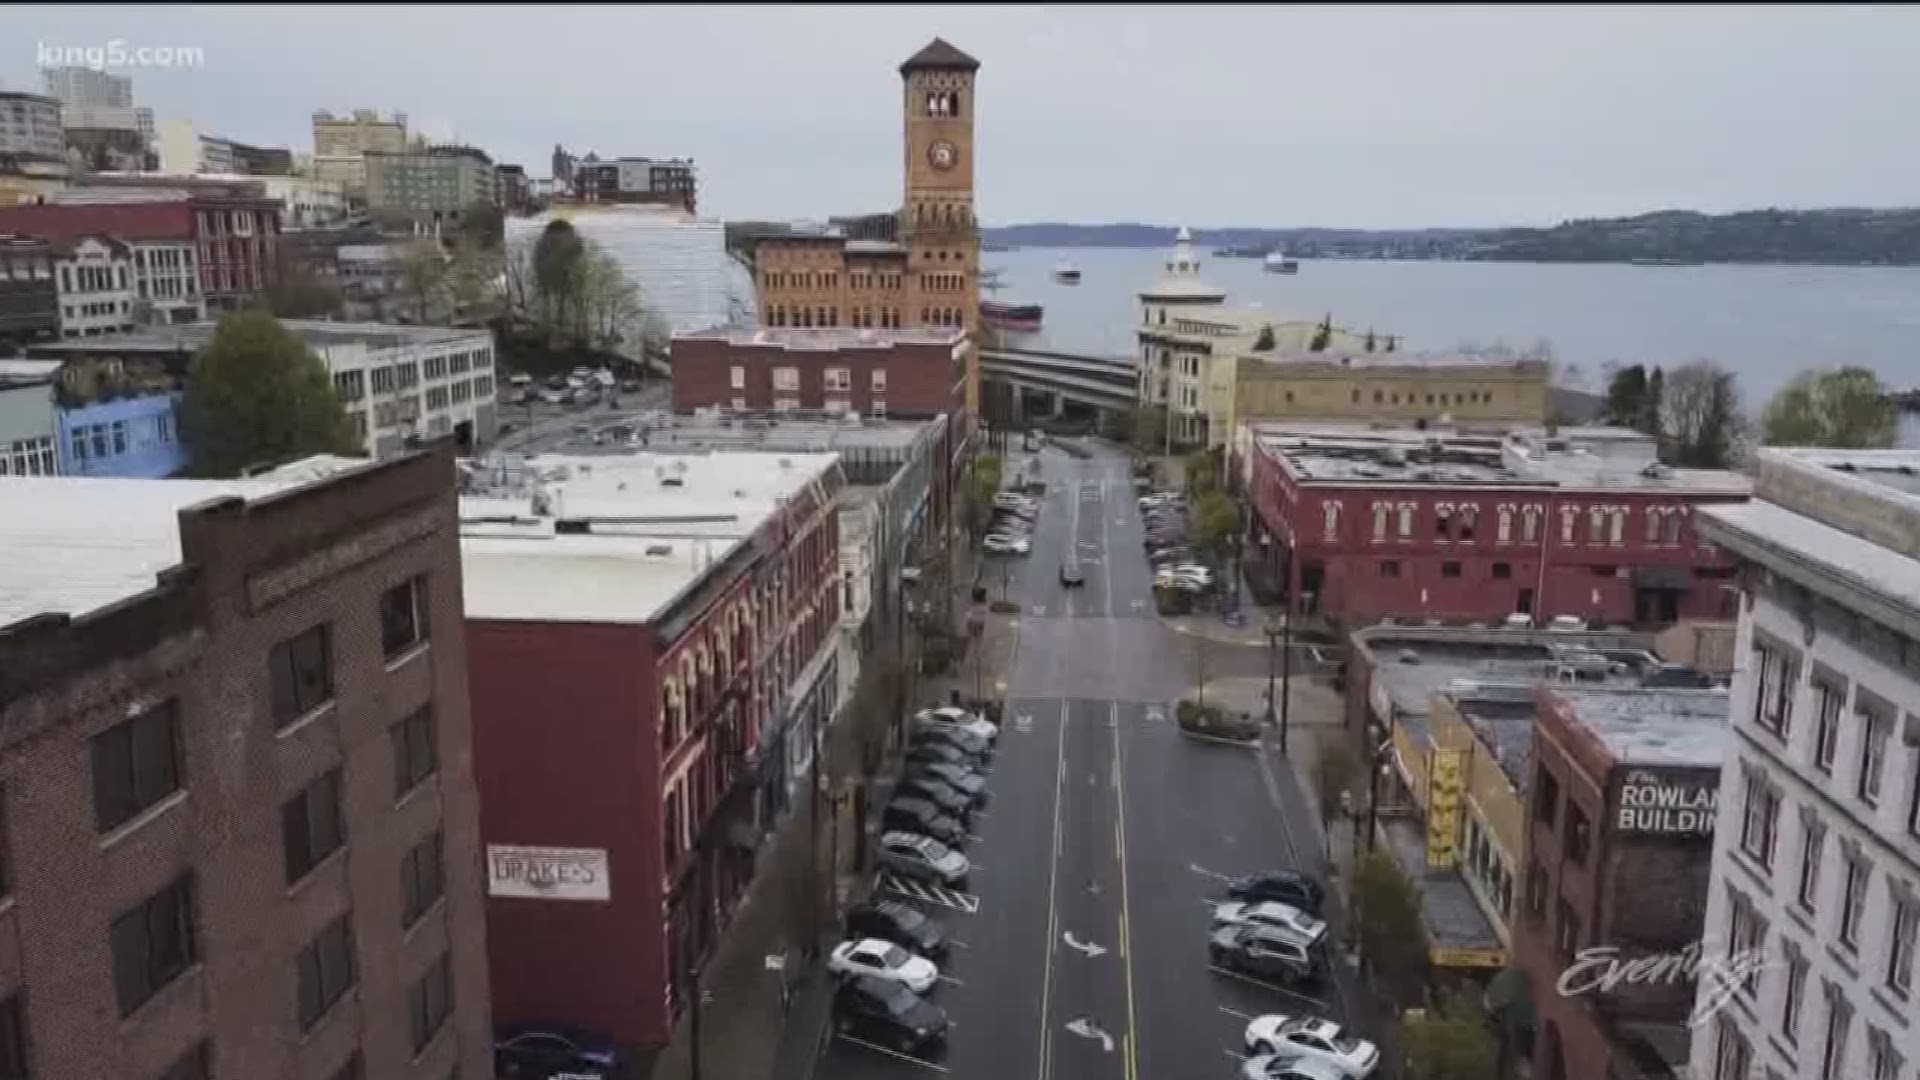 Founder of popular "Over Tacoma" posts is newcomer trying to discover his hometown.